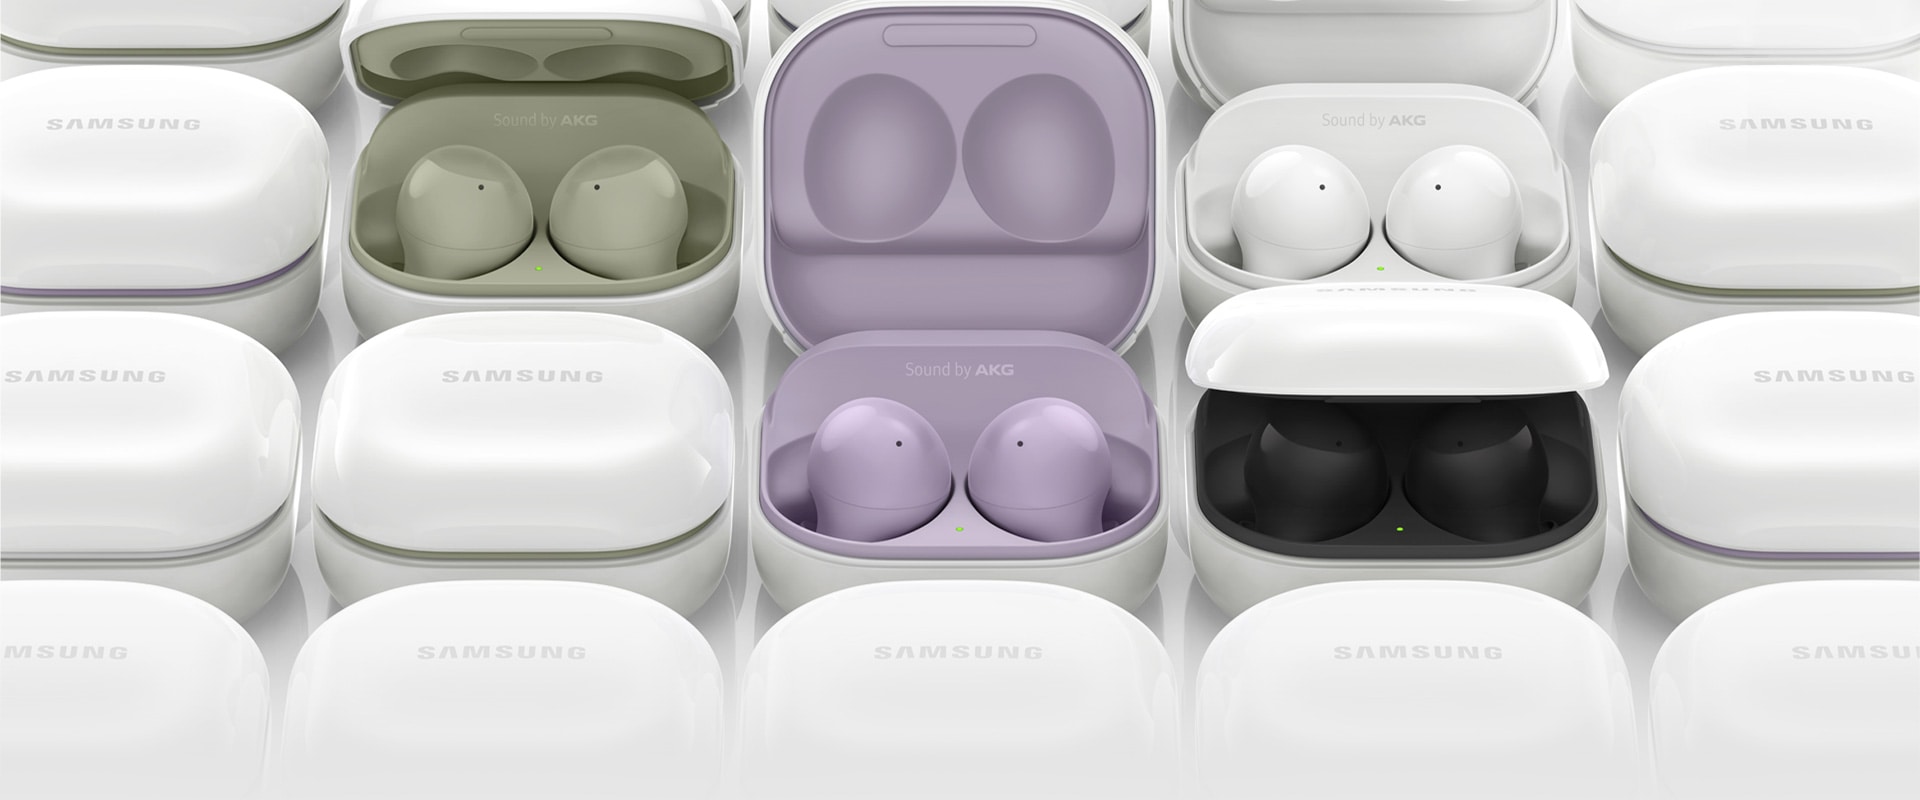 Galaxy Buds2 cases are placed next to each other. Several of the cases are opened, each showing different colours of the inside case, from olive, lavender, white, to graphite.